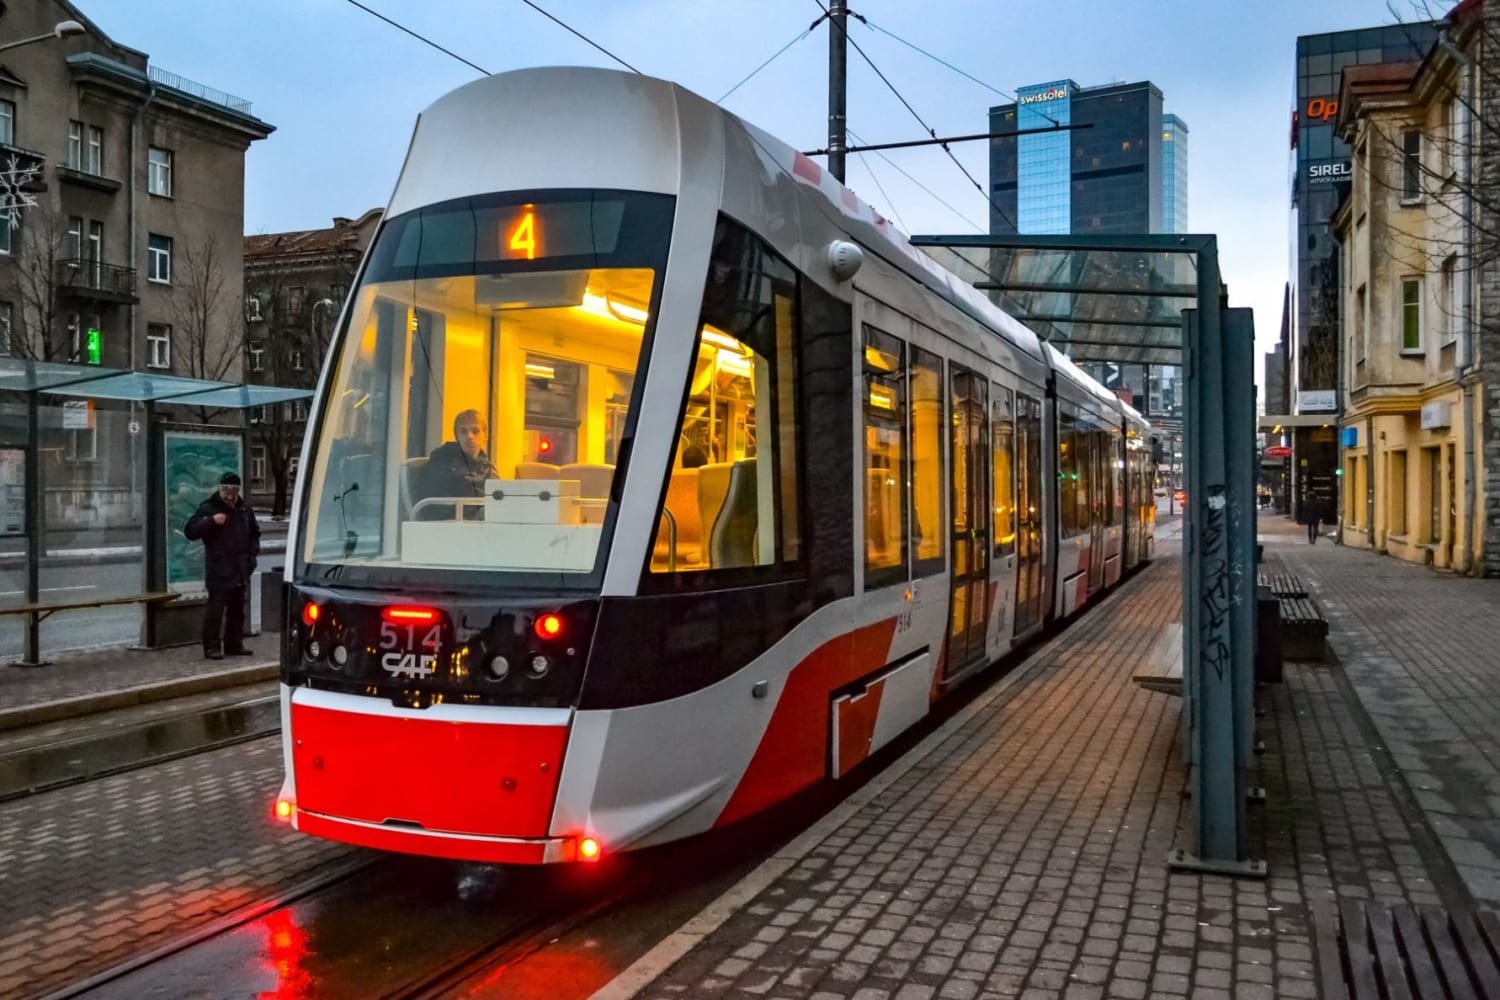 In pictures: Tallinn trams